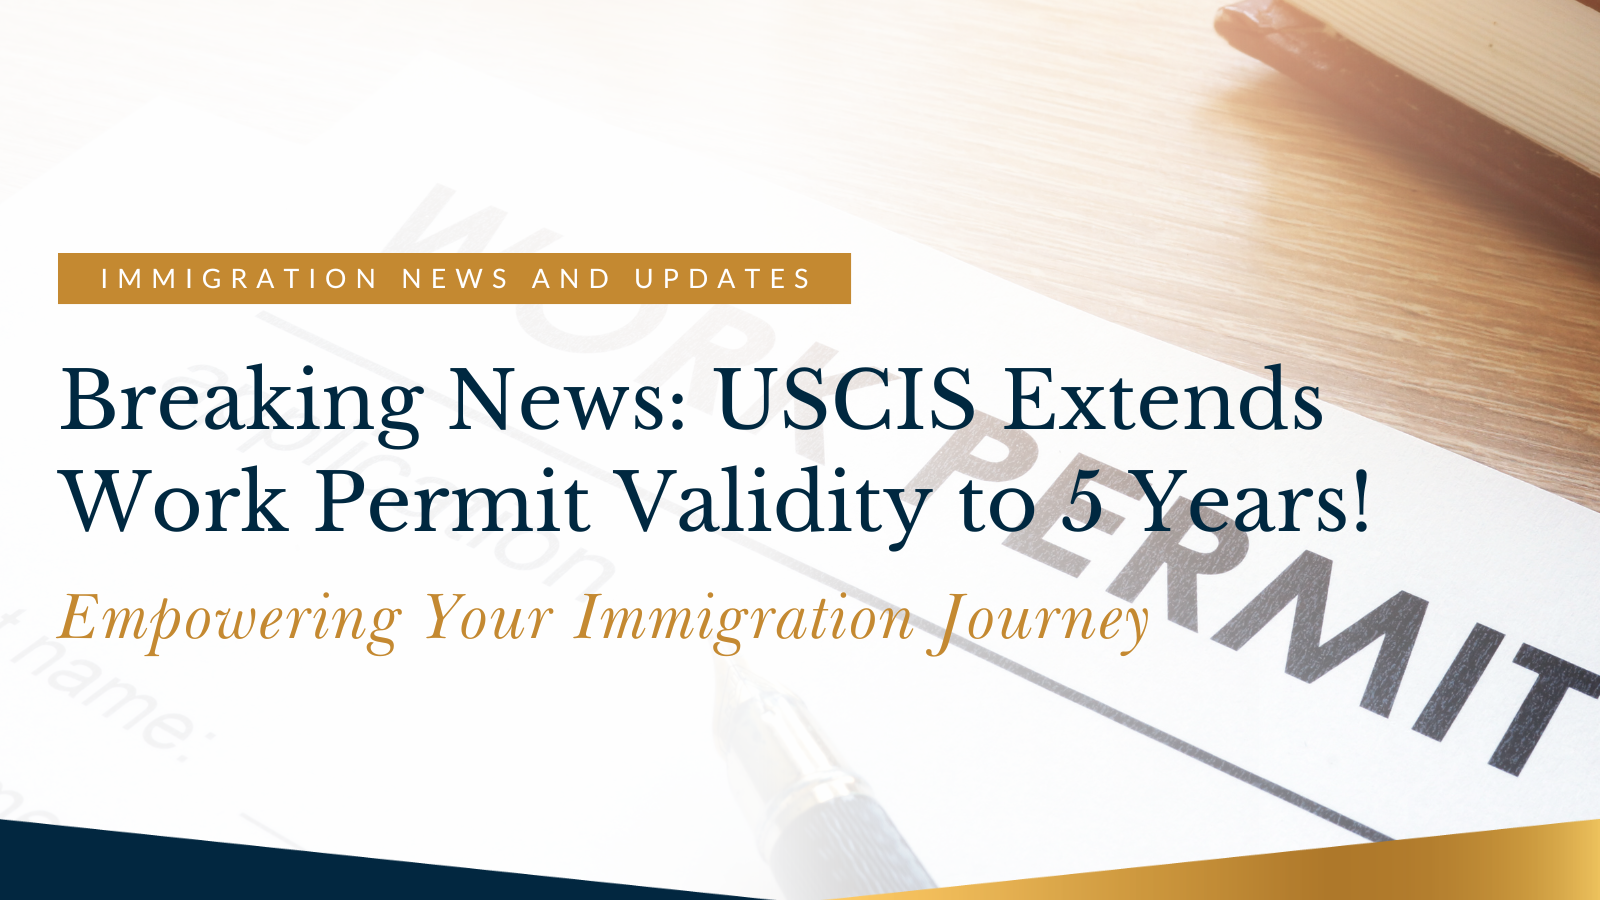 Breaking News: USCIS Extends Work Permit Validity to 5 Years!